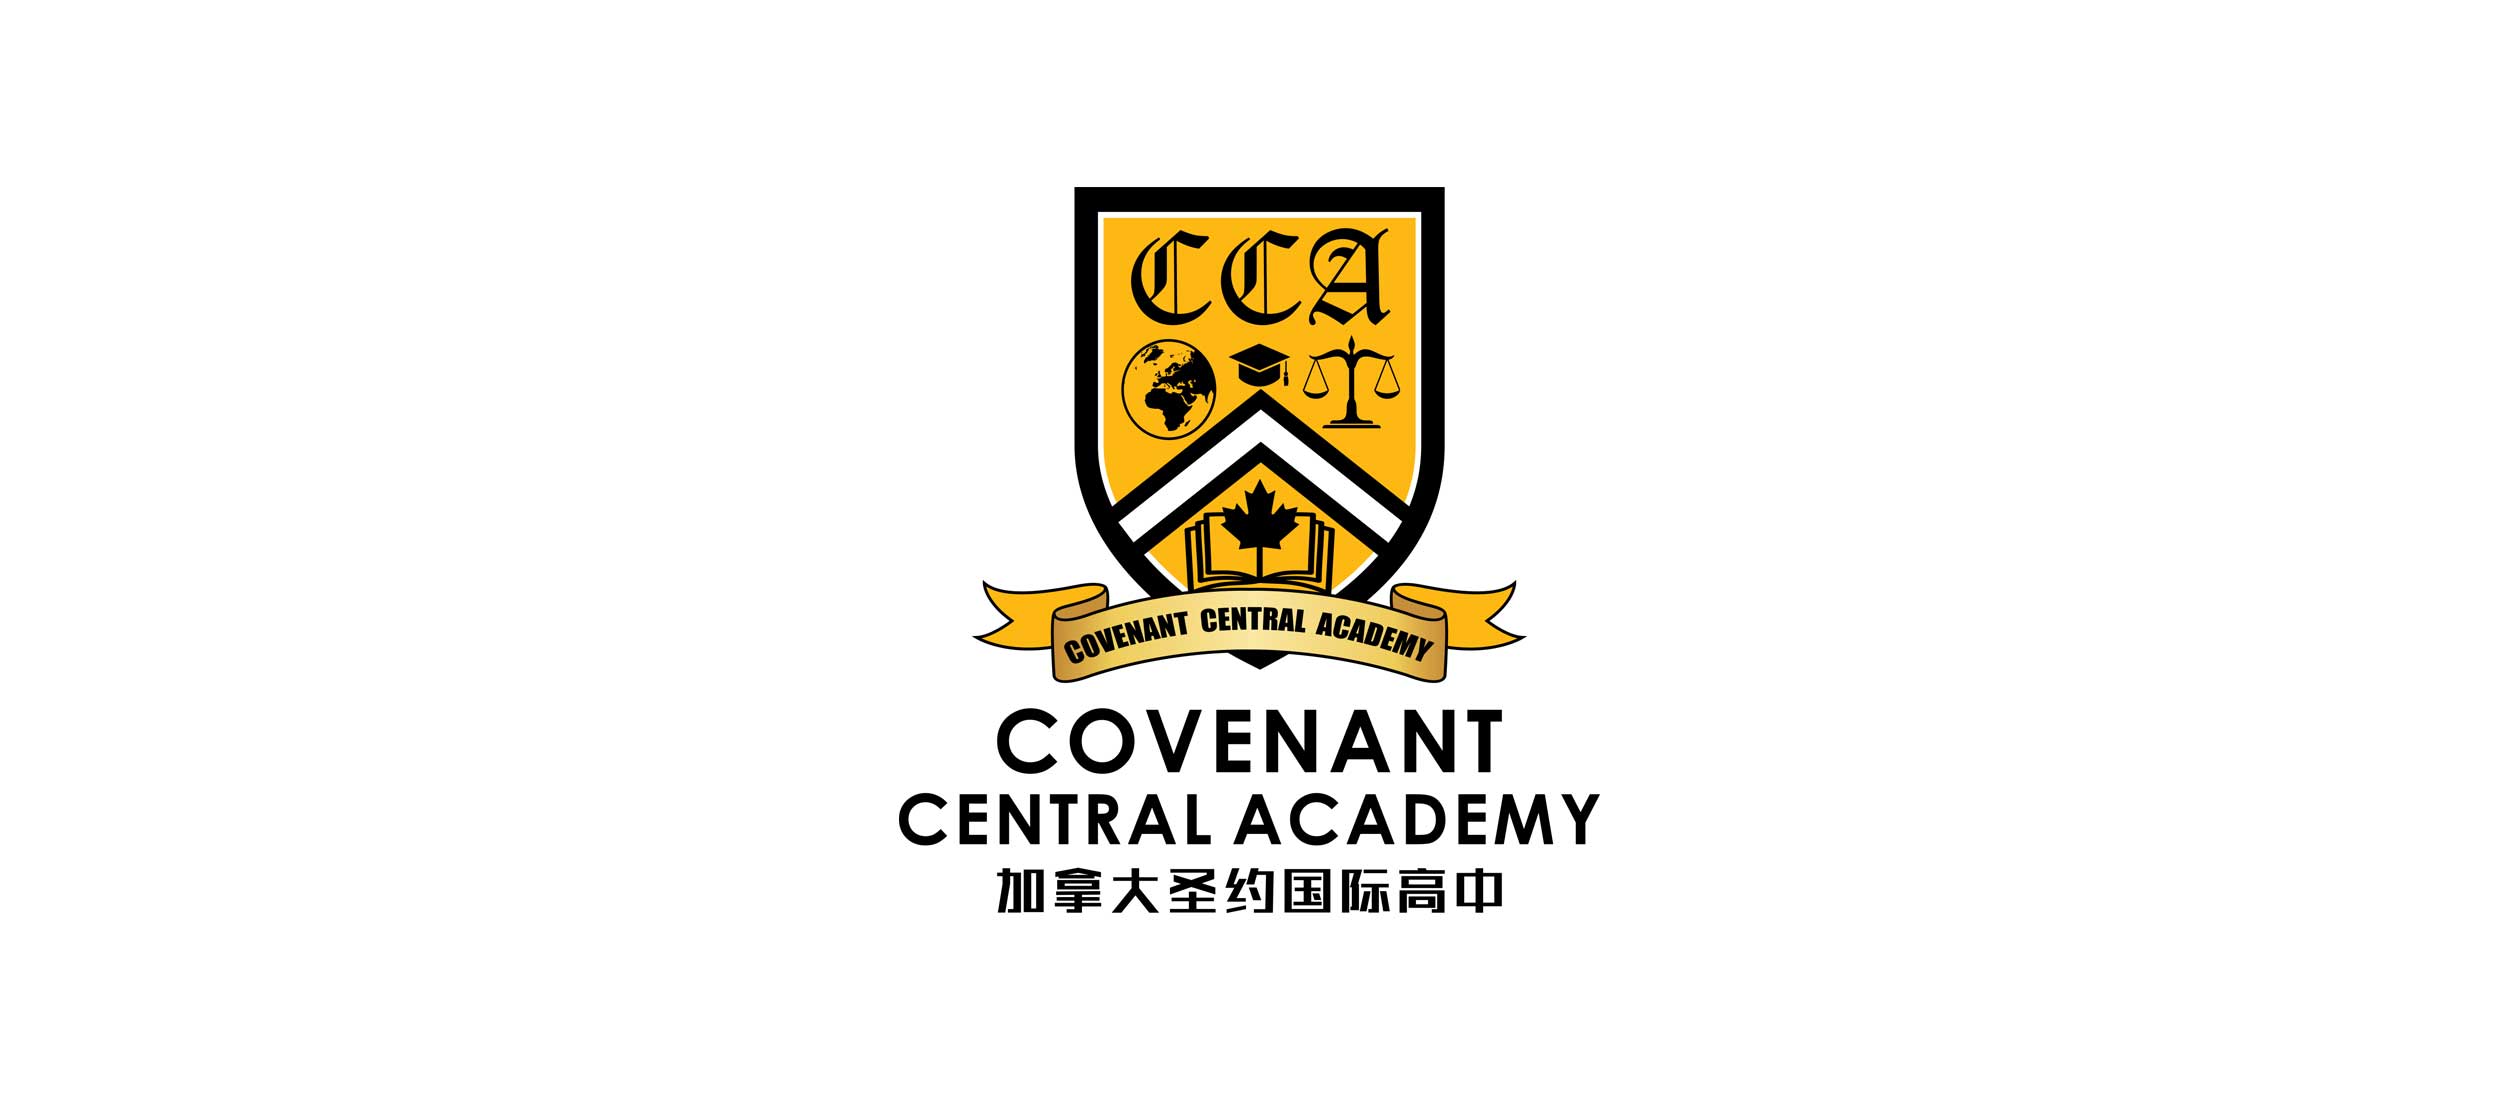 COVENANT CENTRAL ACADEMY